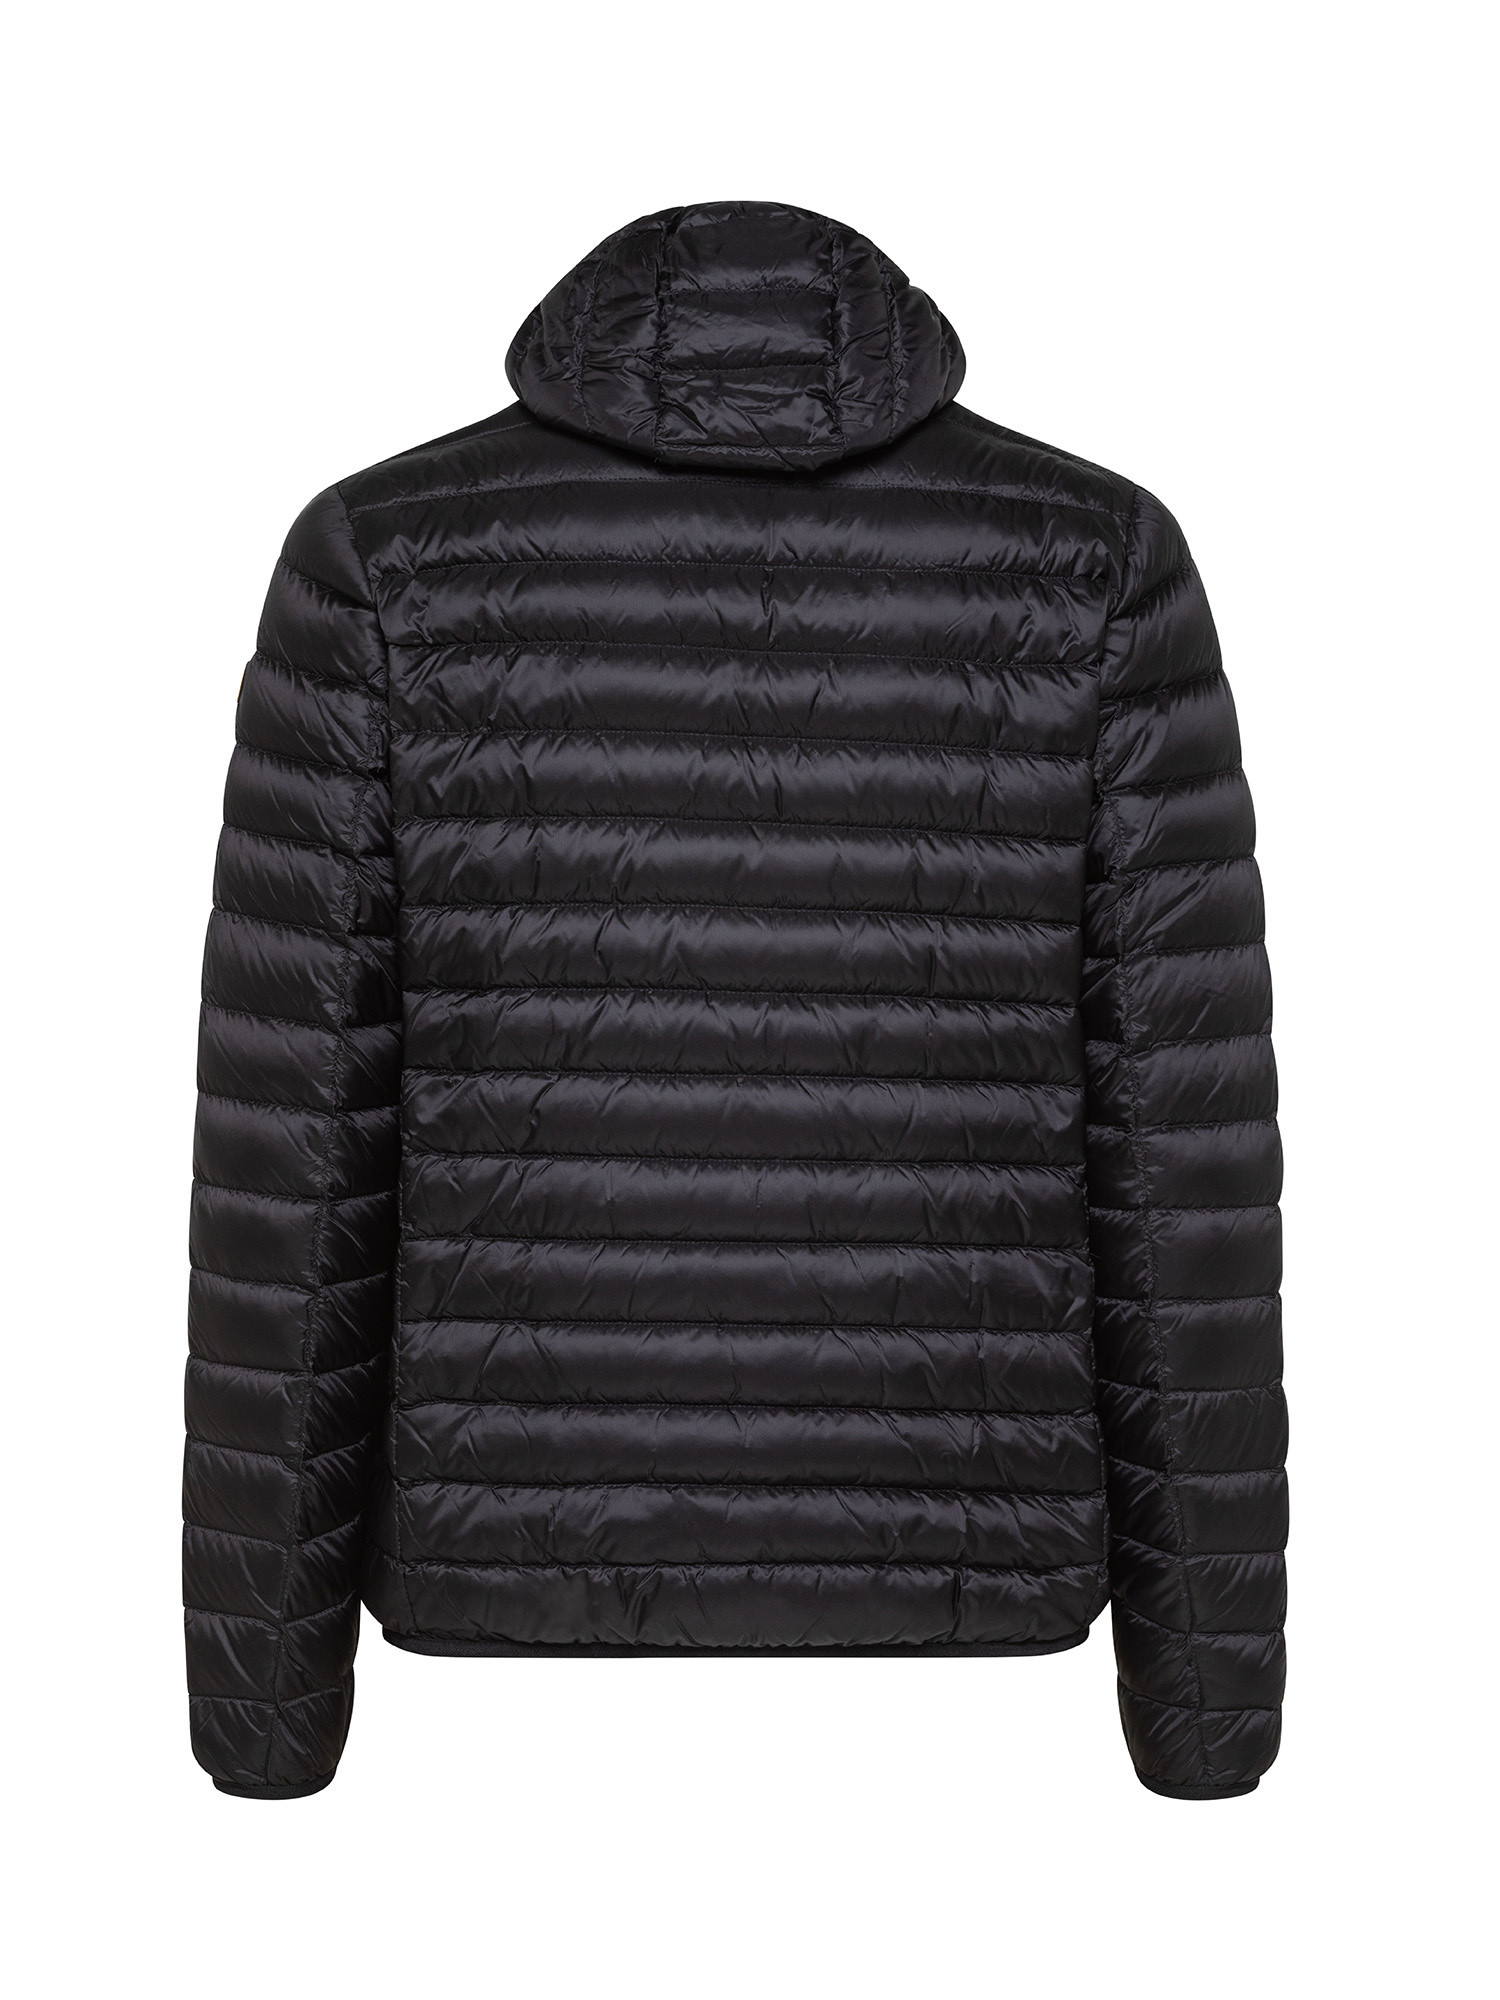 Ciesse Piumini - Down jacket with hood in nylon, Black, large image number 1